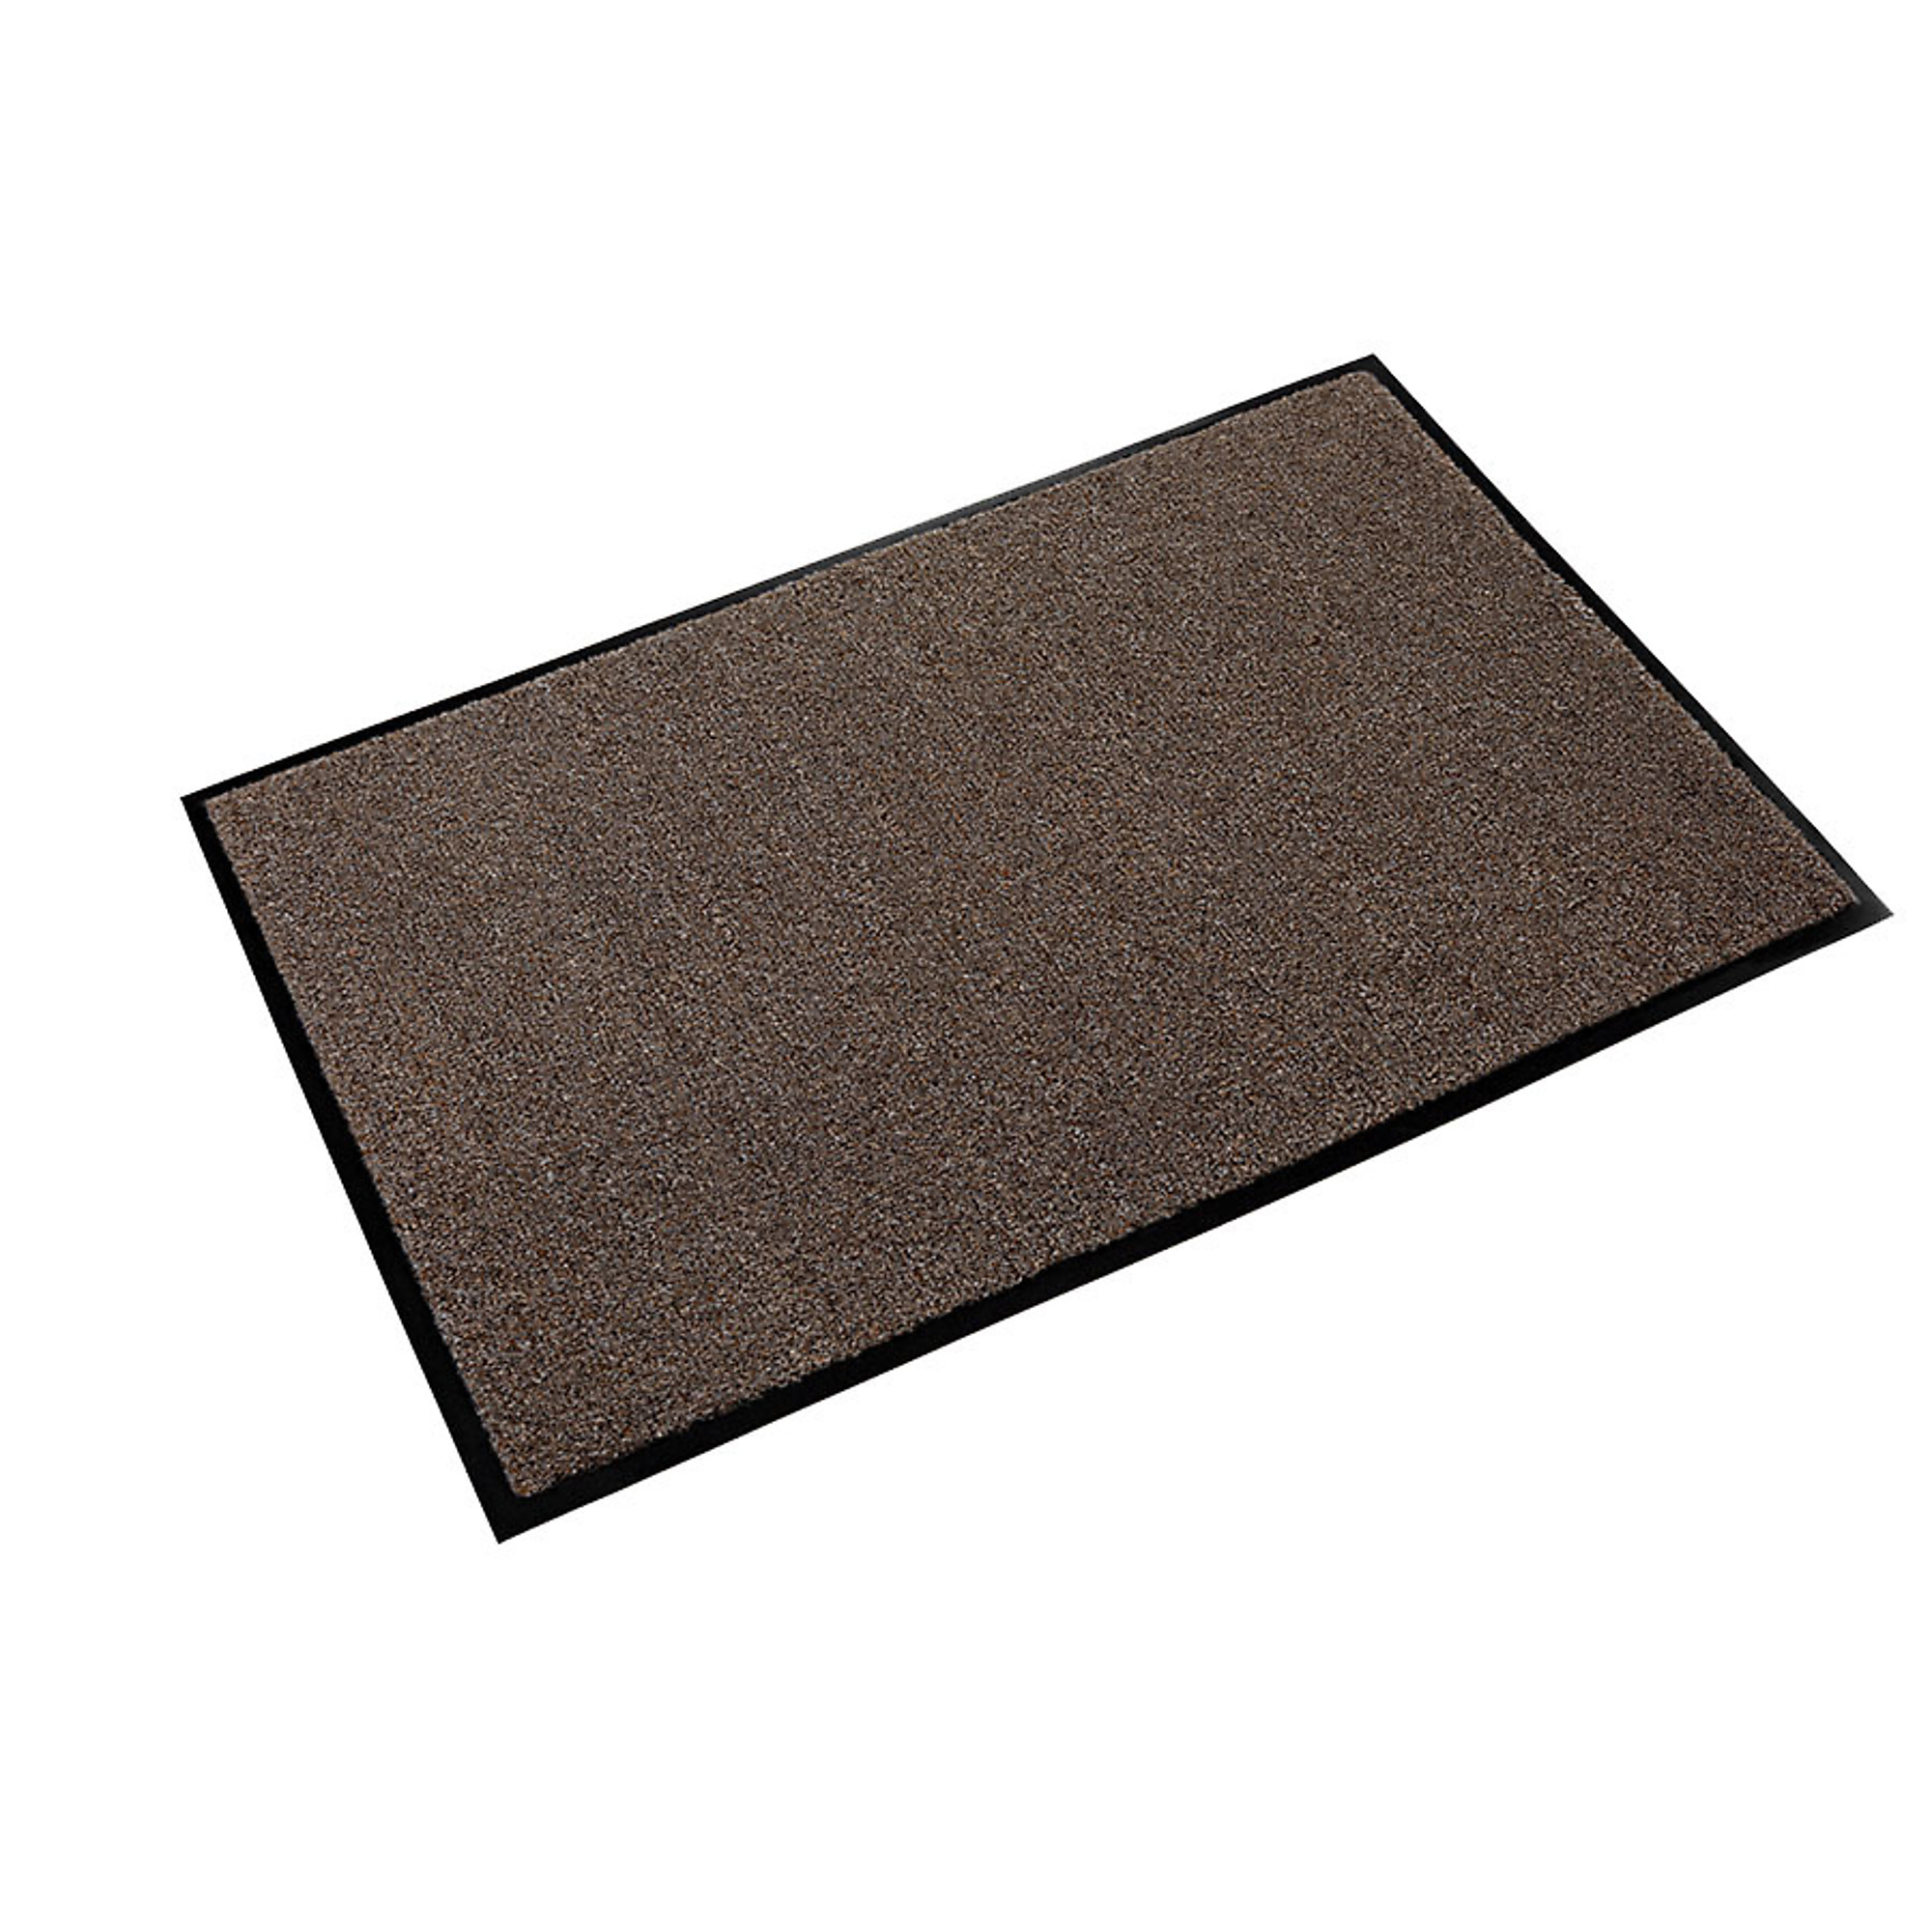 Crown Matting Technologies, Rely-On Olefin 4ft.x6ft. Walnut, Width 48 in, Length 72 in, Thickness 3/8 in, Model GS 0046WA